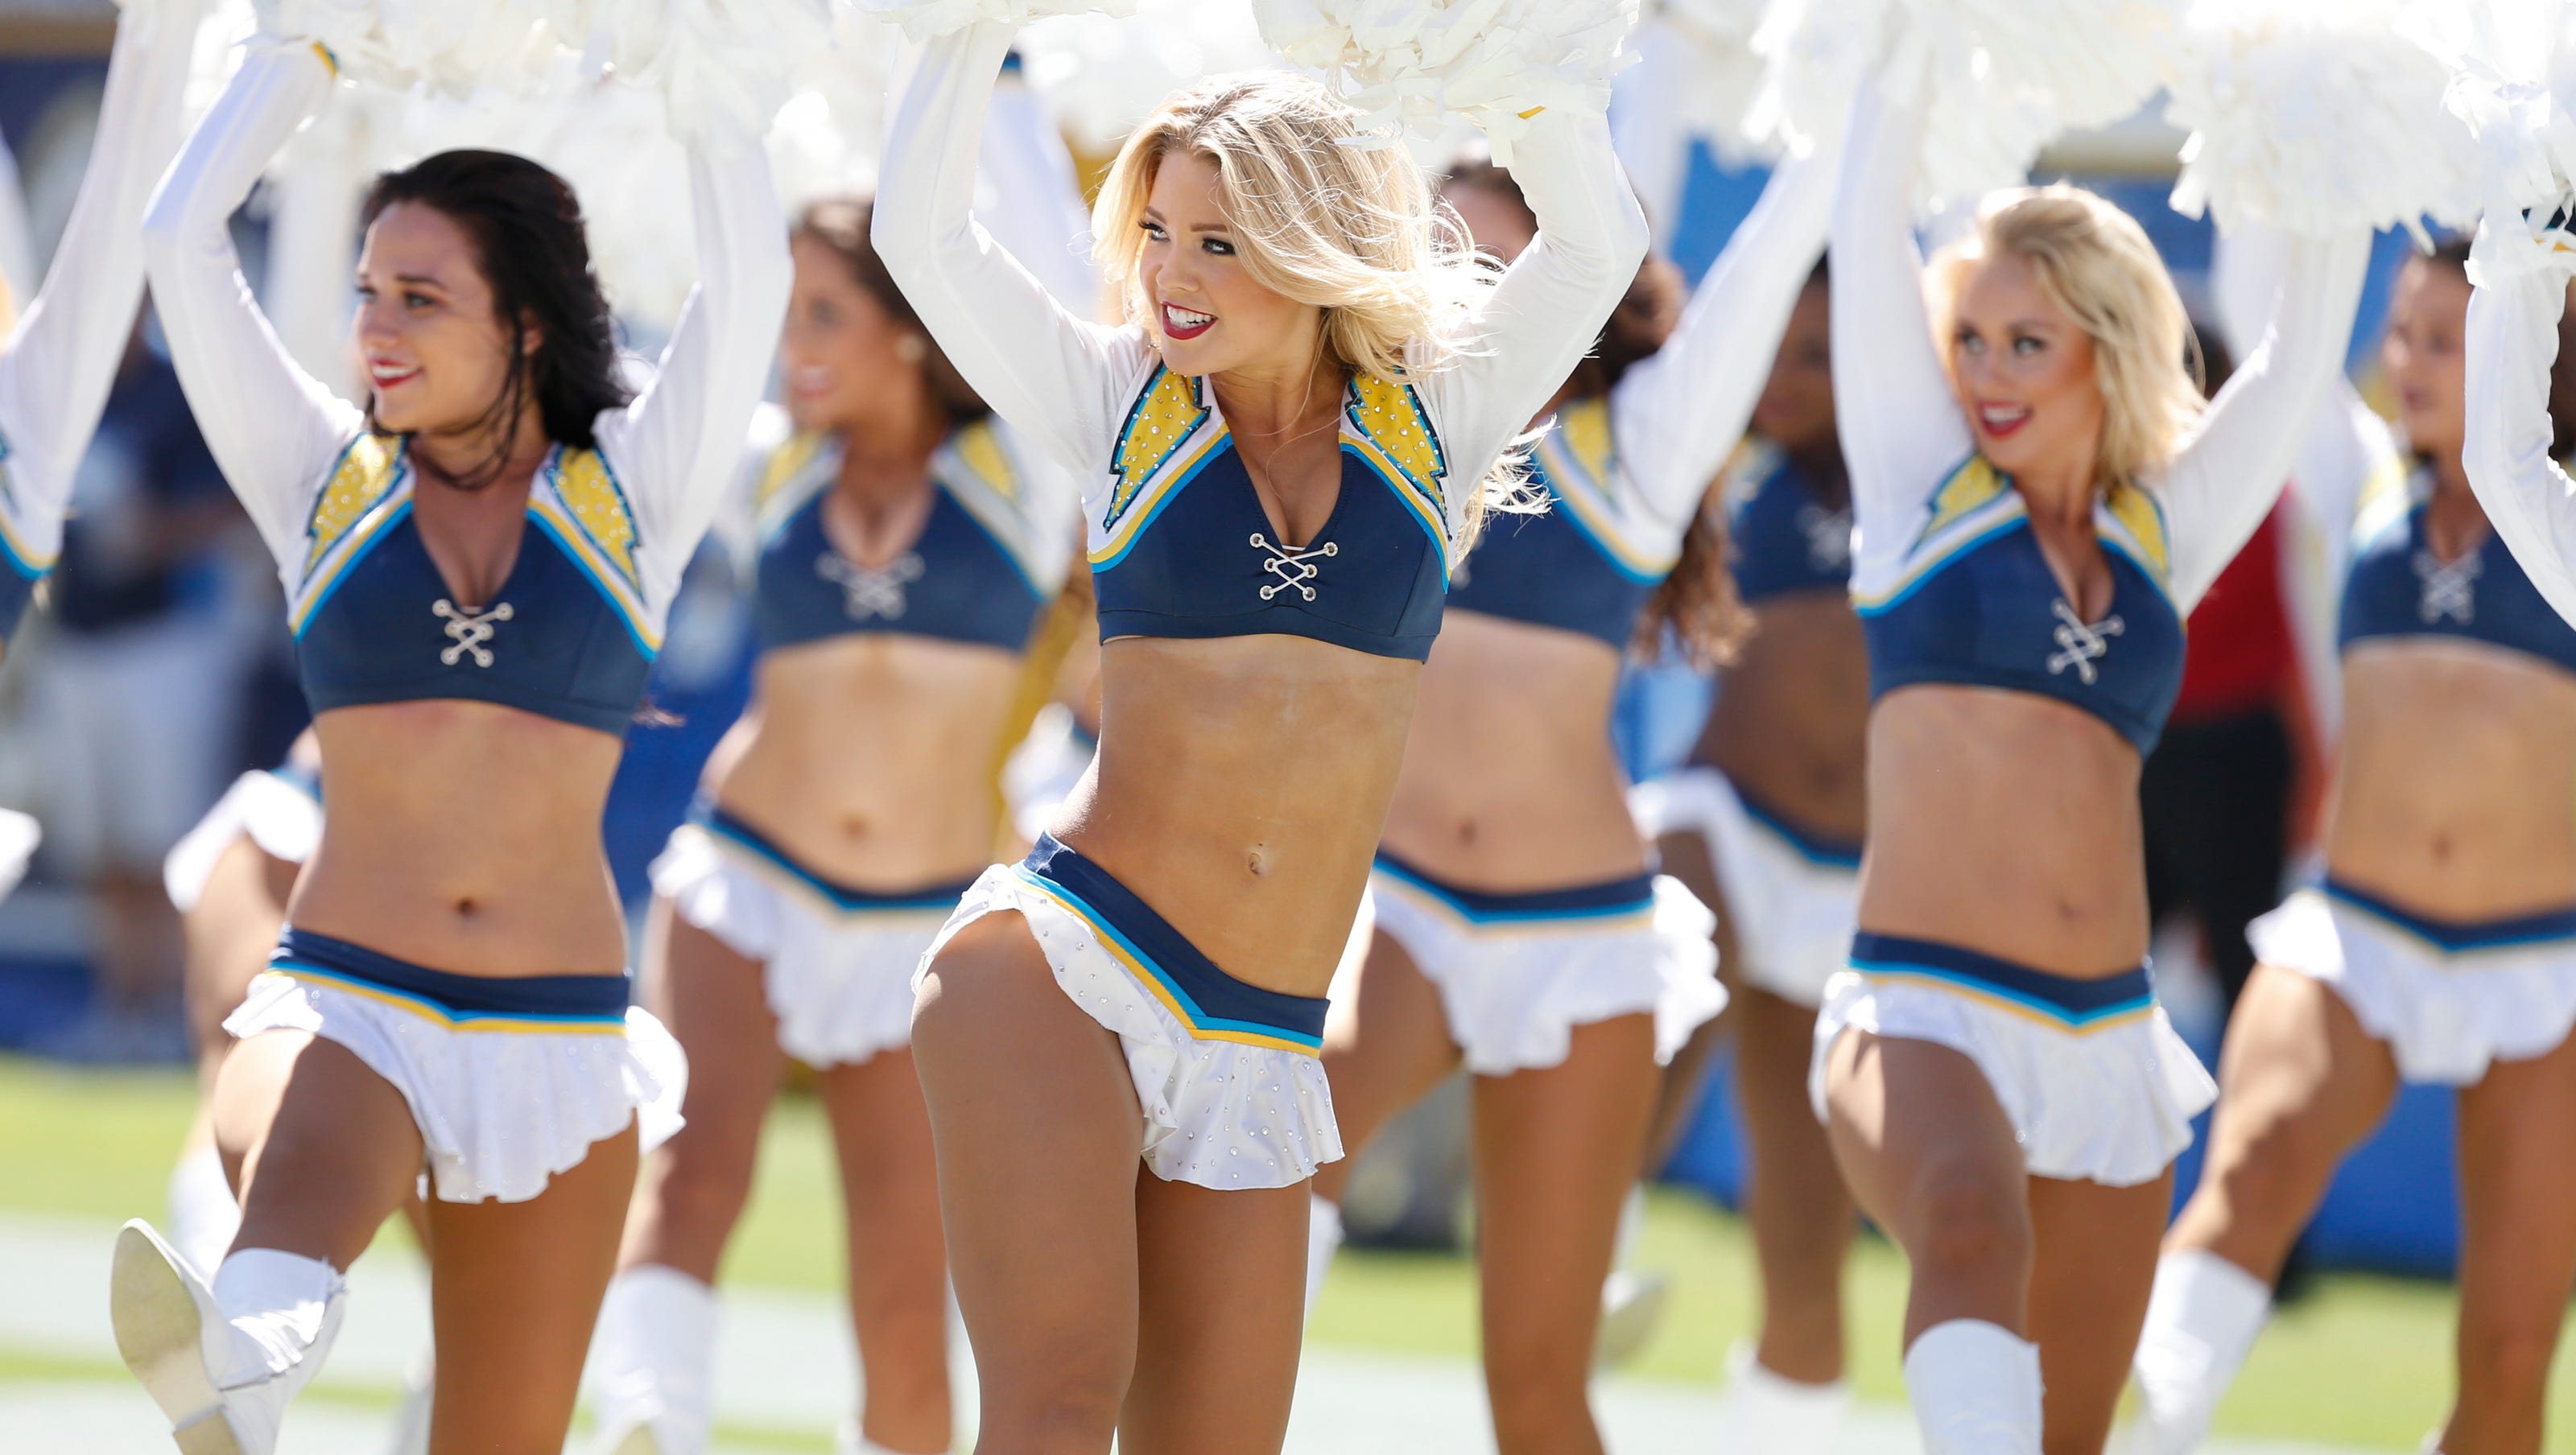 Detroit Lions adding cheerleaders 'I couldn’t be more thrilled'